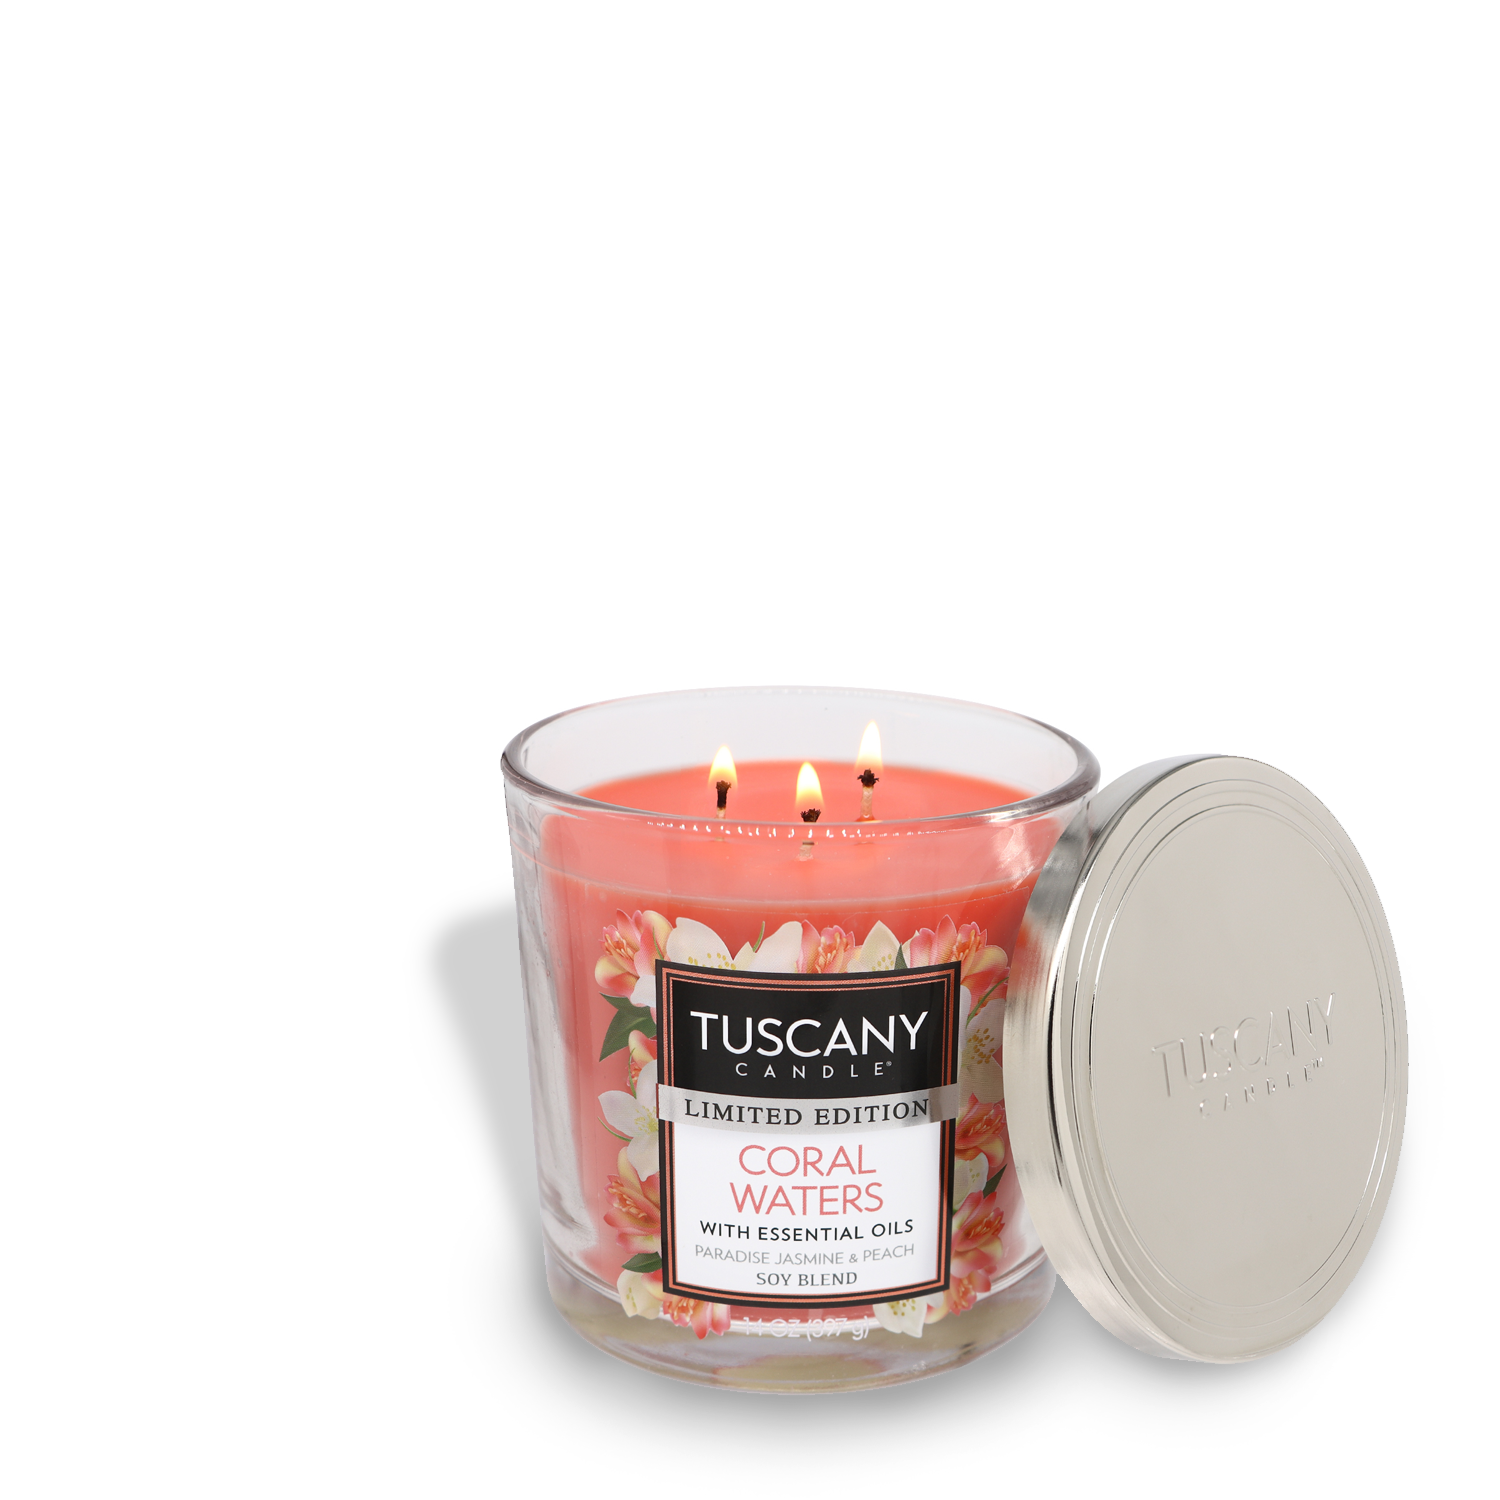 A Tuscany Candle® SEASONAL Coral Waters Long-Lasting Scented Jar Candle (14 oz) in a glass jar with a label that reads "tuscany limited edition coral waters with essential oils soy blend" beside its metallic lid.